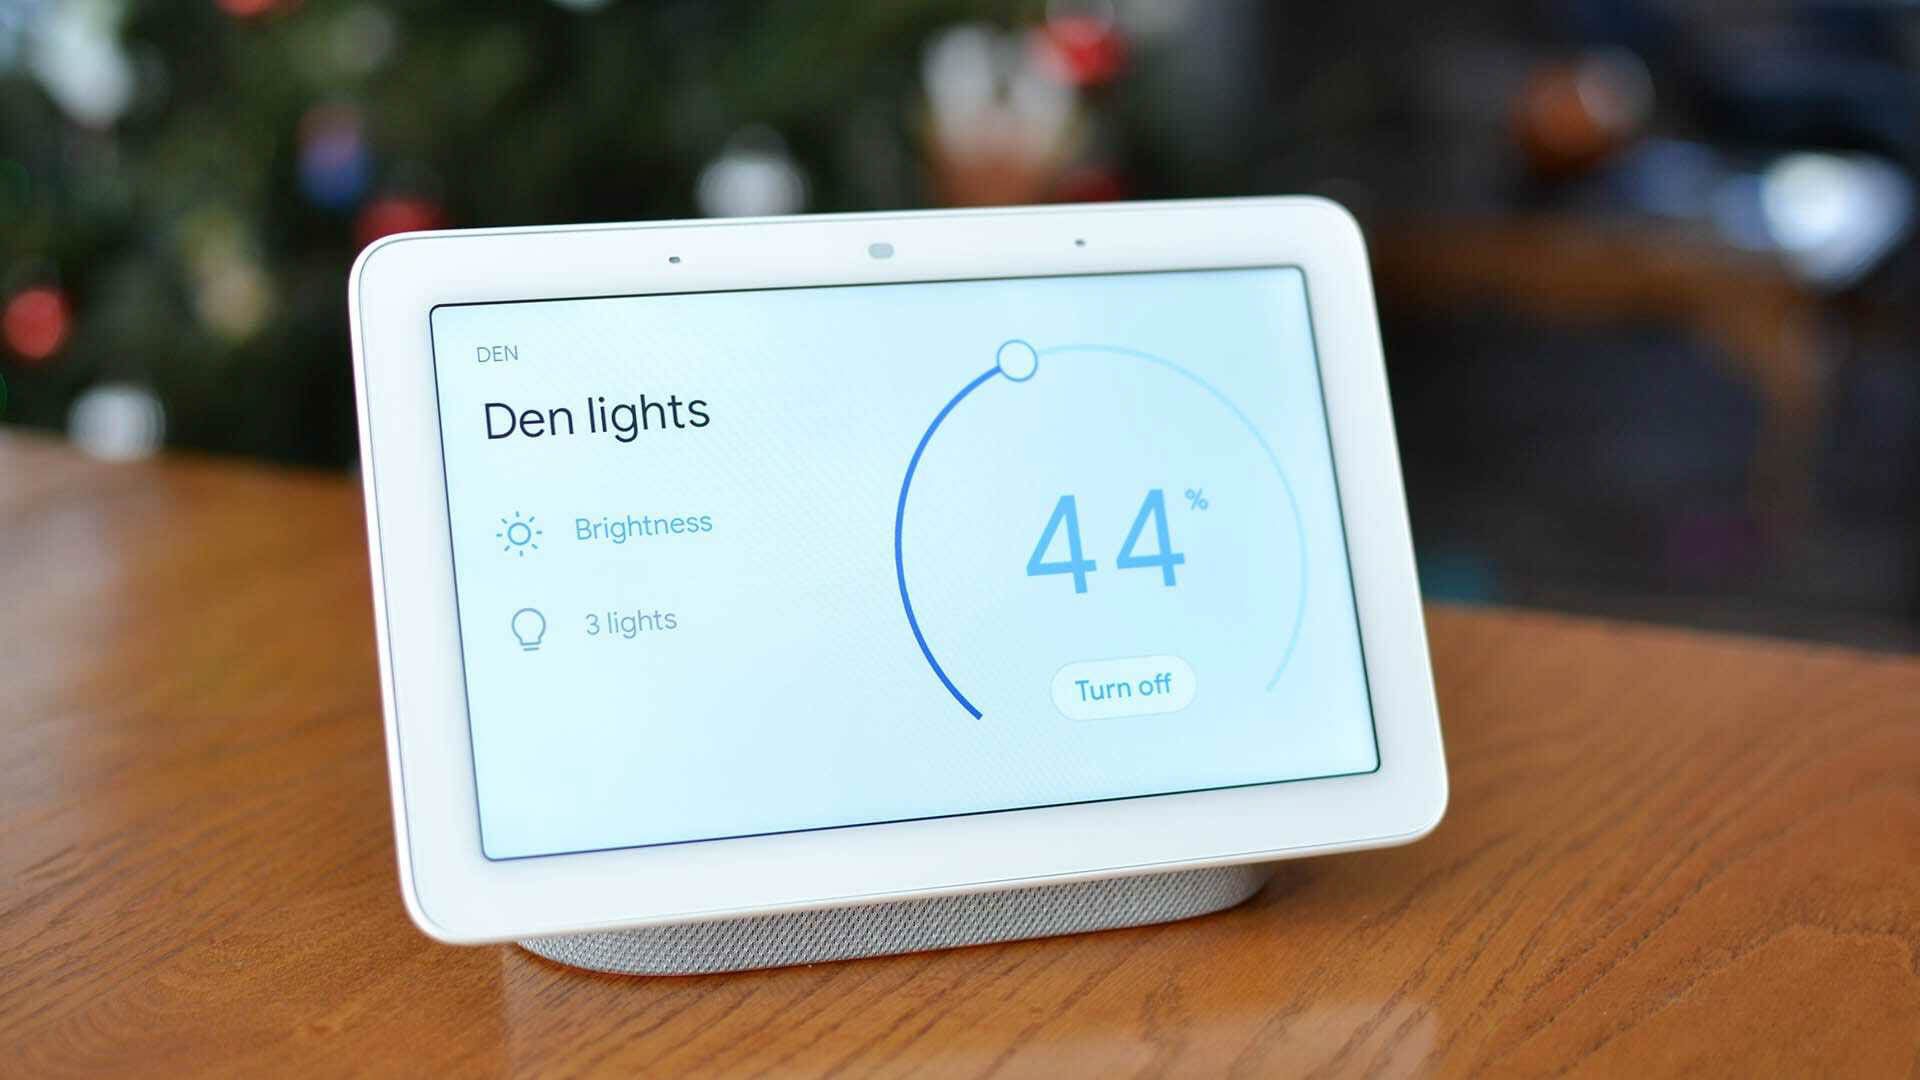 Controlling the lights with the Nest Hub